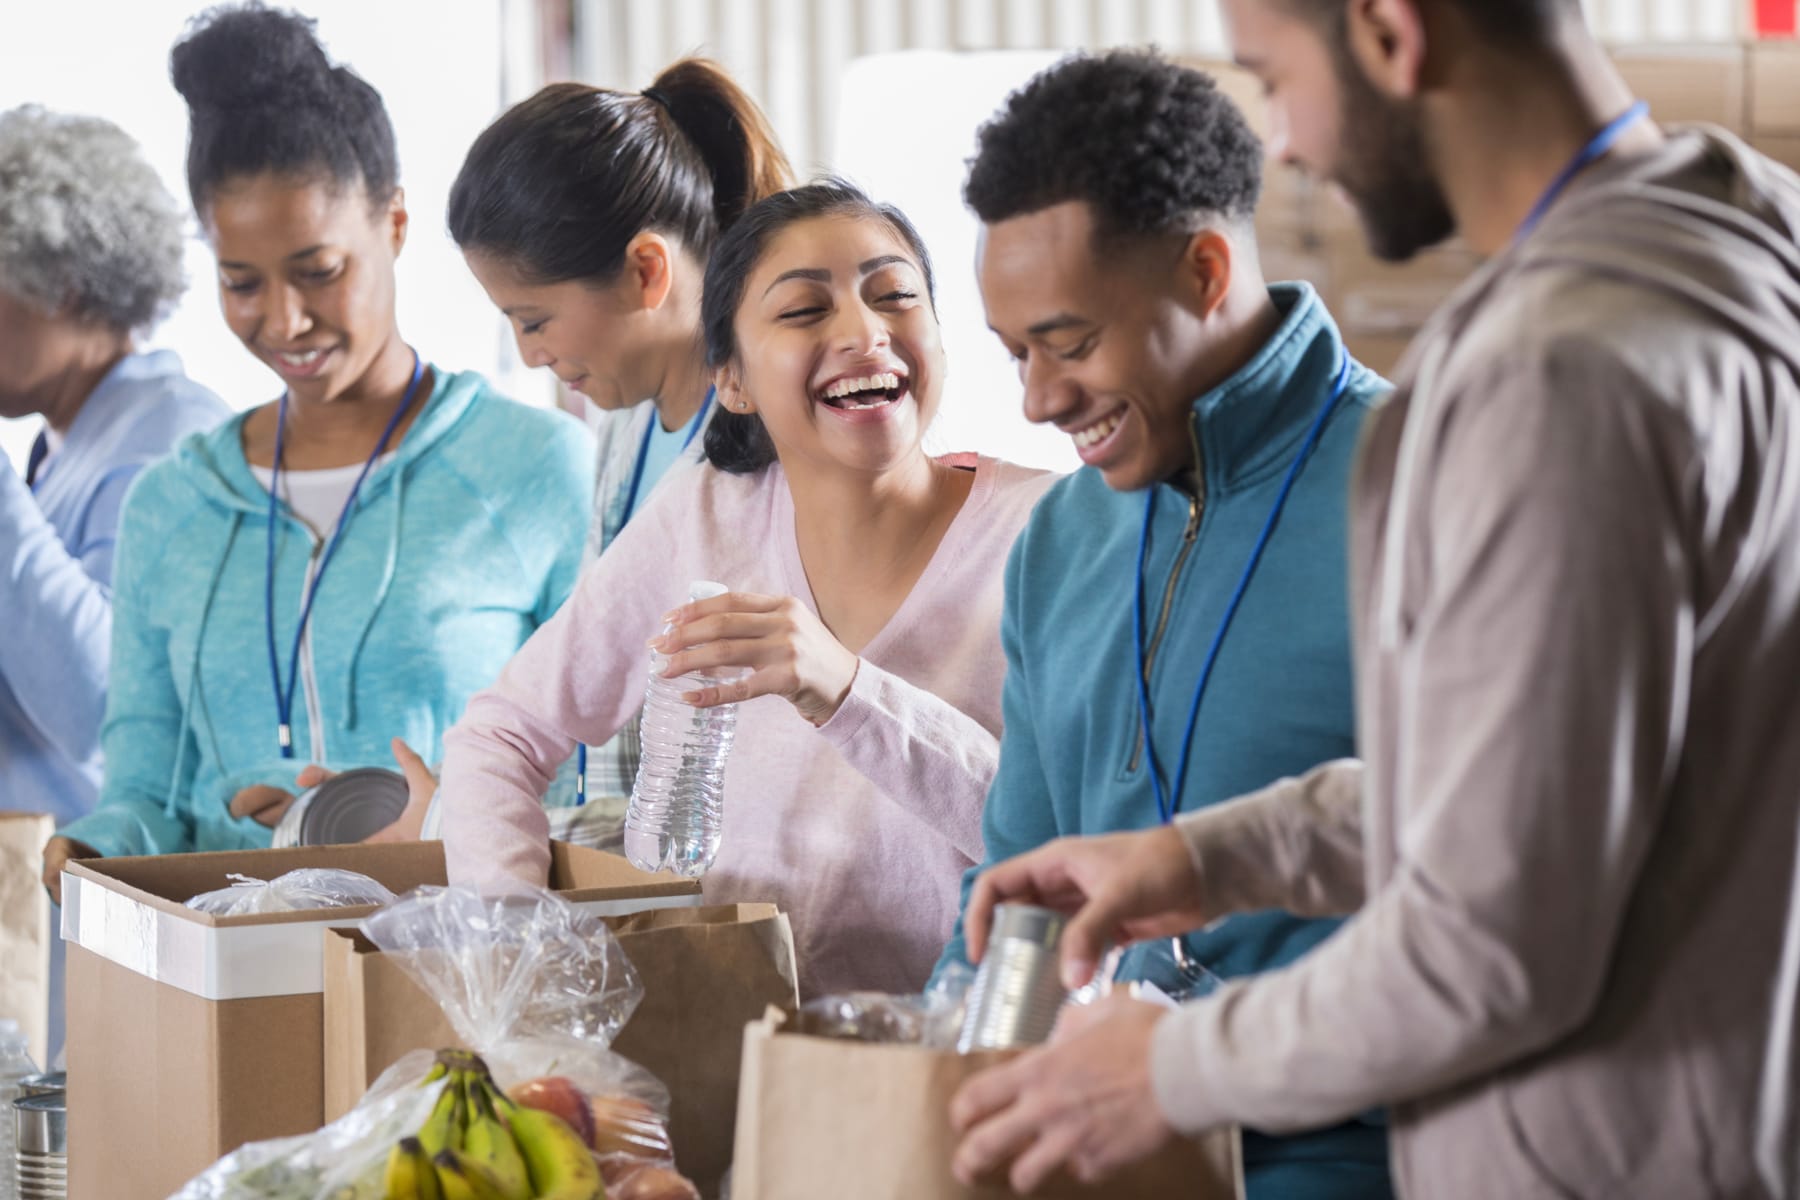 A group of people happily packing groceries